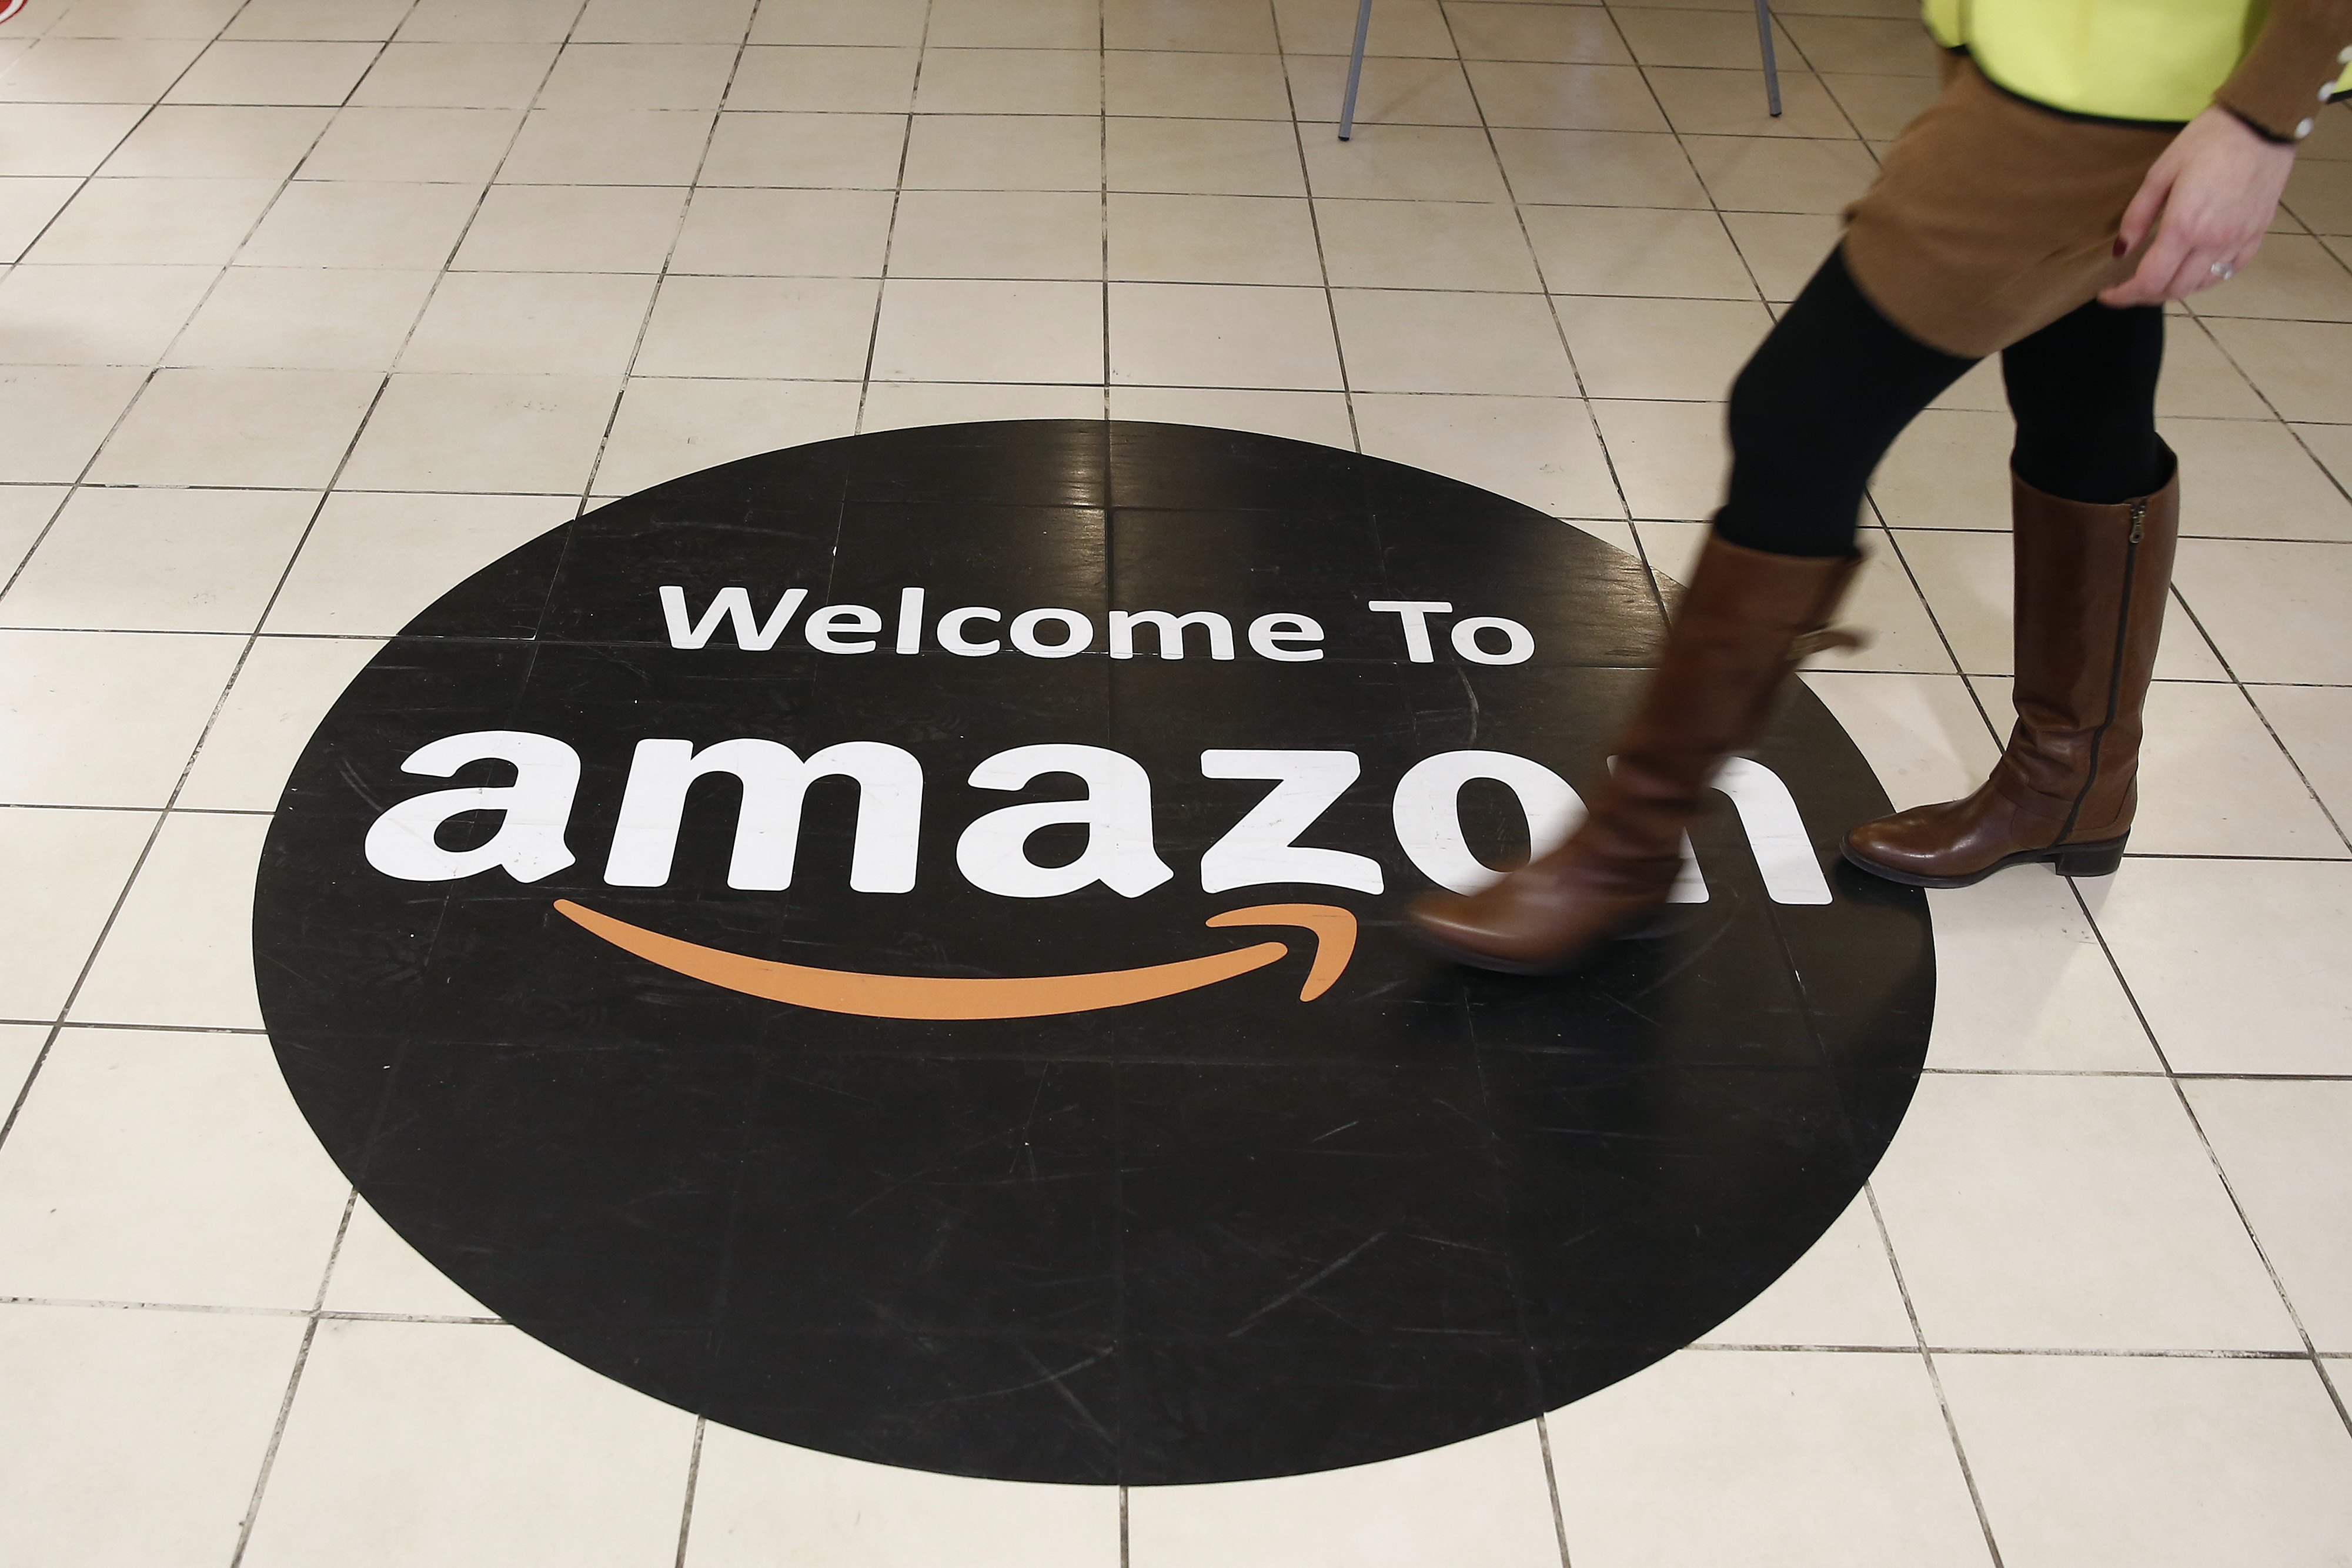 An employee walks over a logo on the floor of Amazon.com Inc.'s fulfillment centers in Rugeley, U.K. on Dec. 2, 2013. (Simon Dawson—Bloomberg/Getty Images)